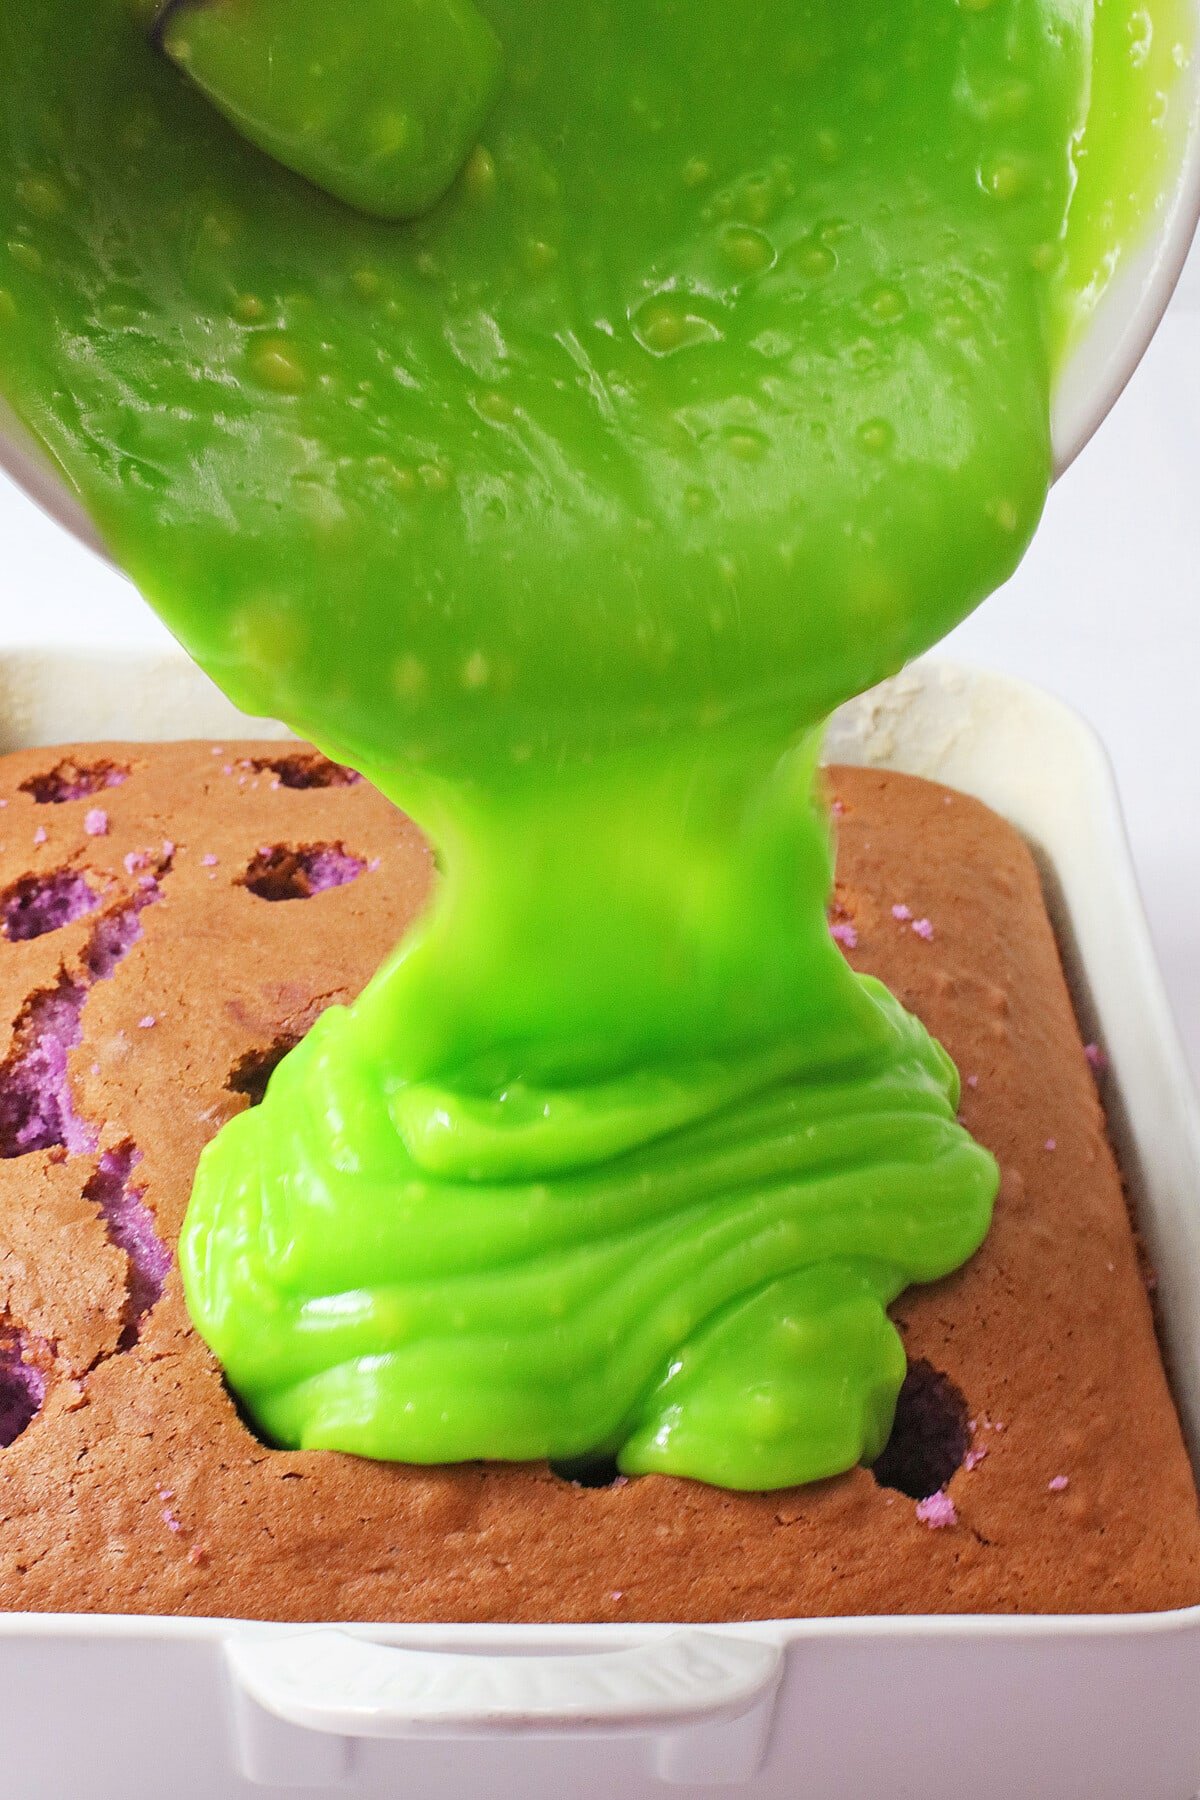 pour the green pudding on the cake